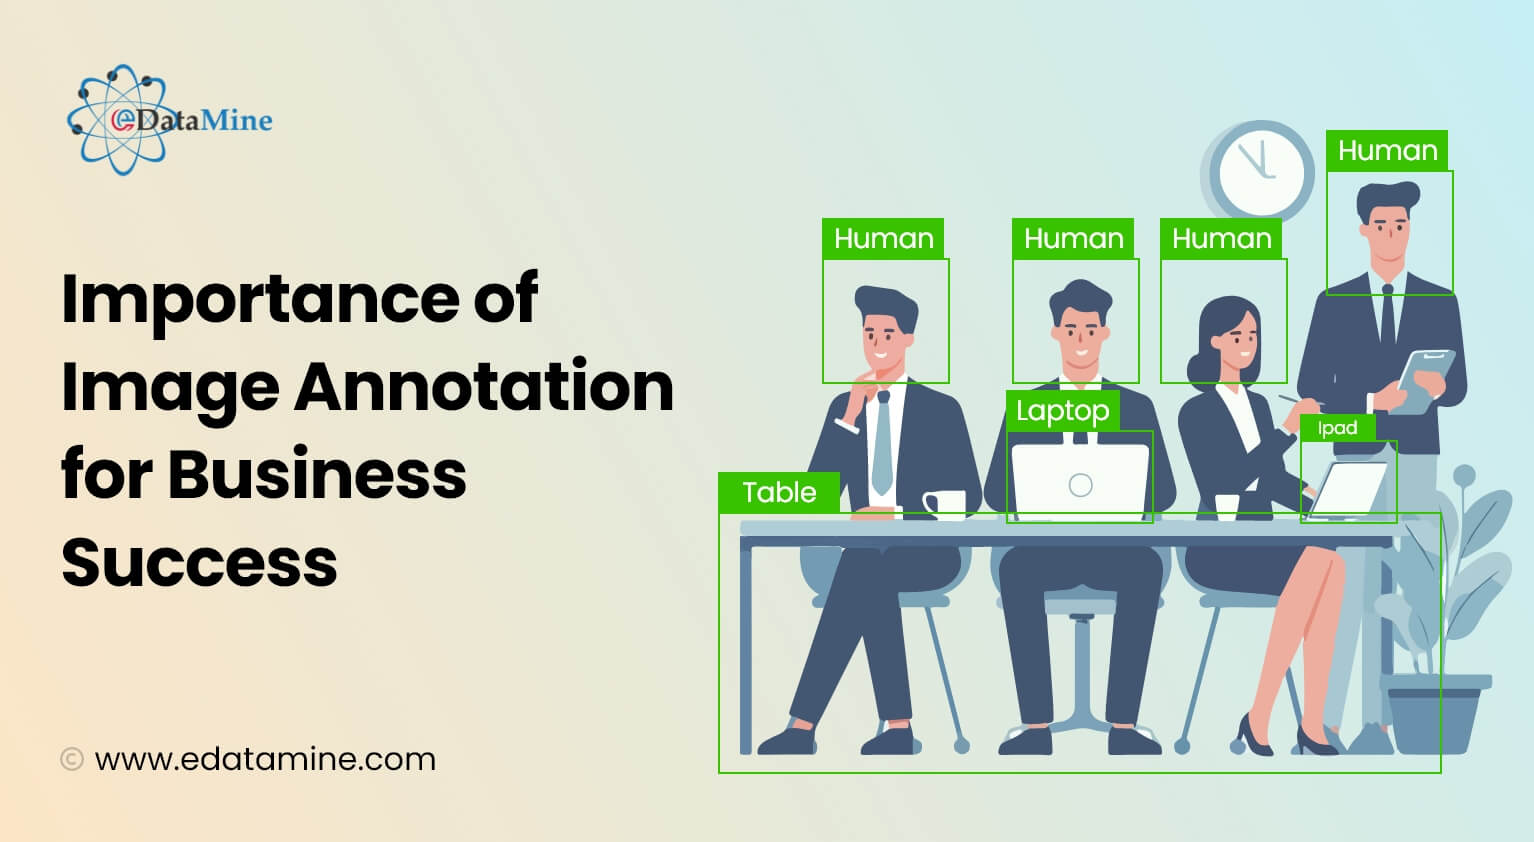 Importance of Image Annotation for Business Success